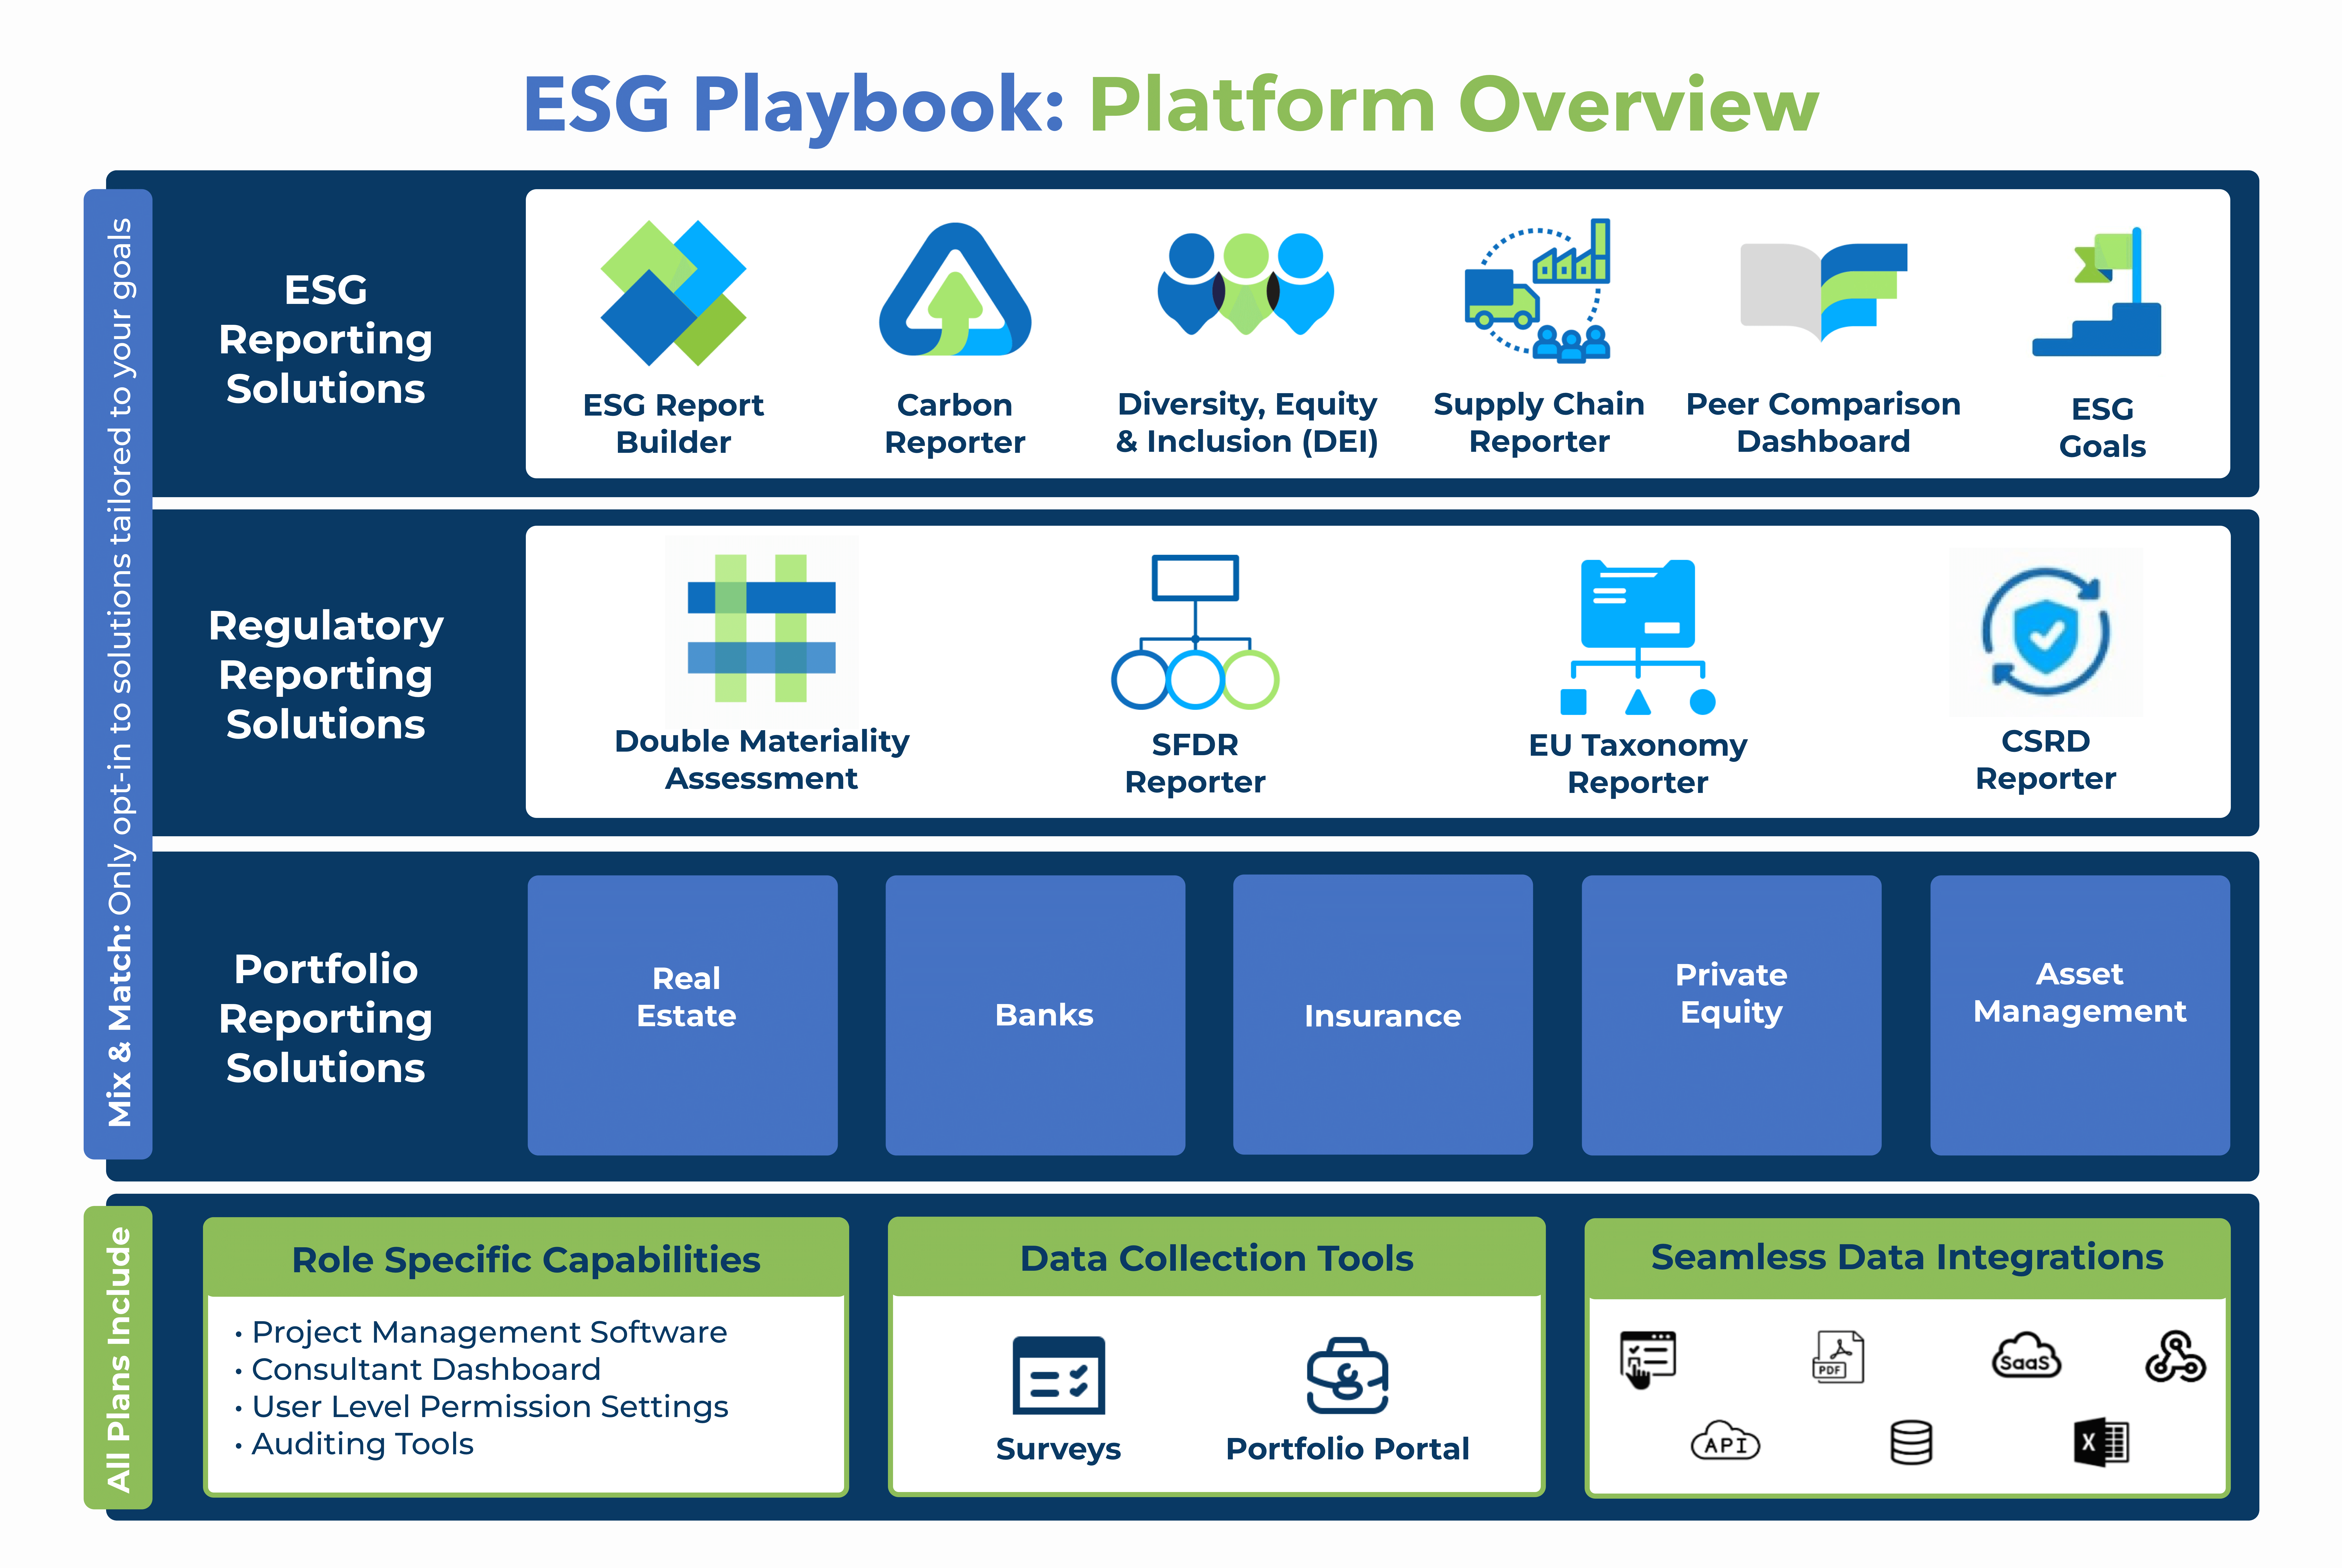 ESG Playbook brings you a sustainable advantage